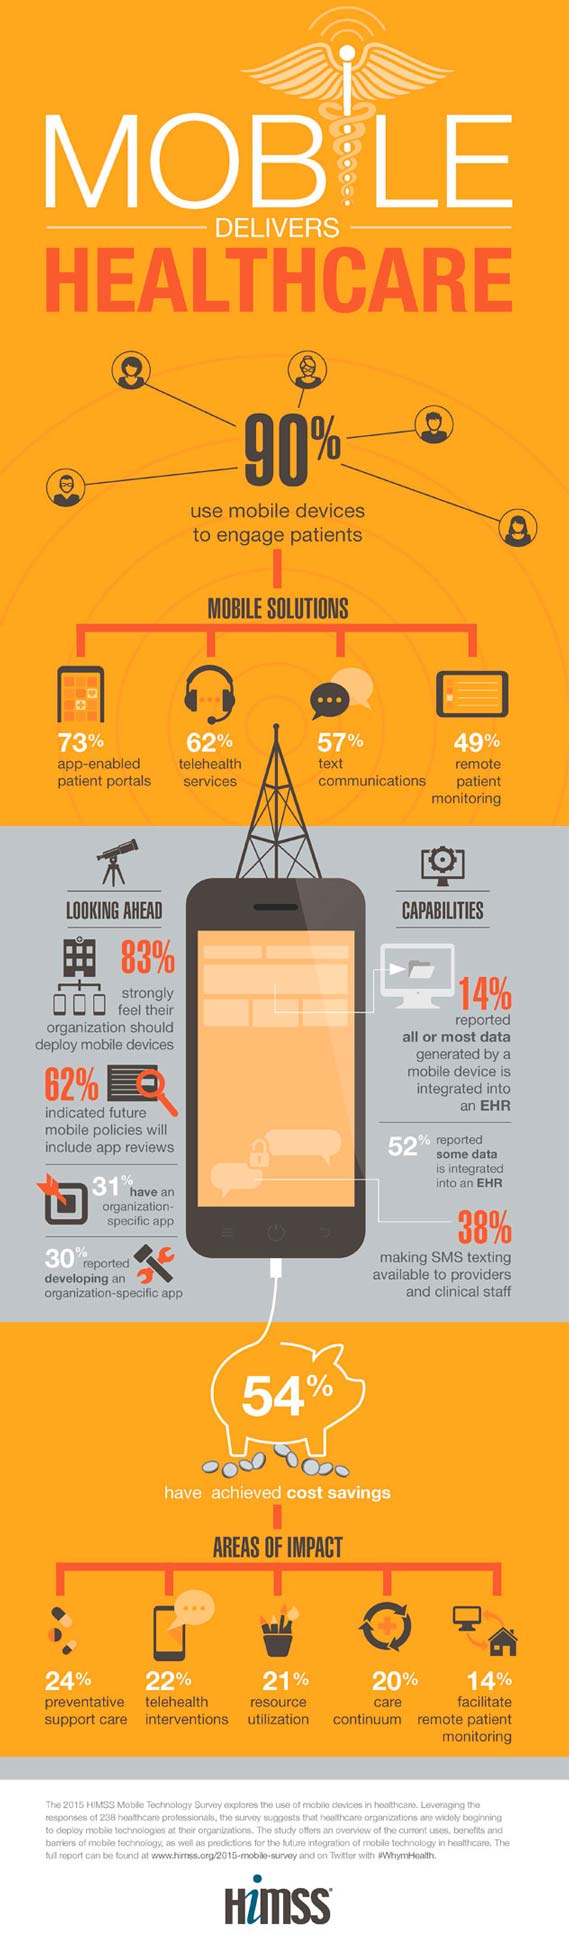 2015 Mobile Technology Survey Infographic